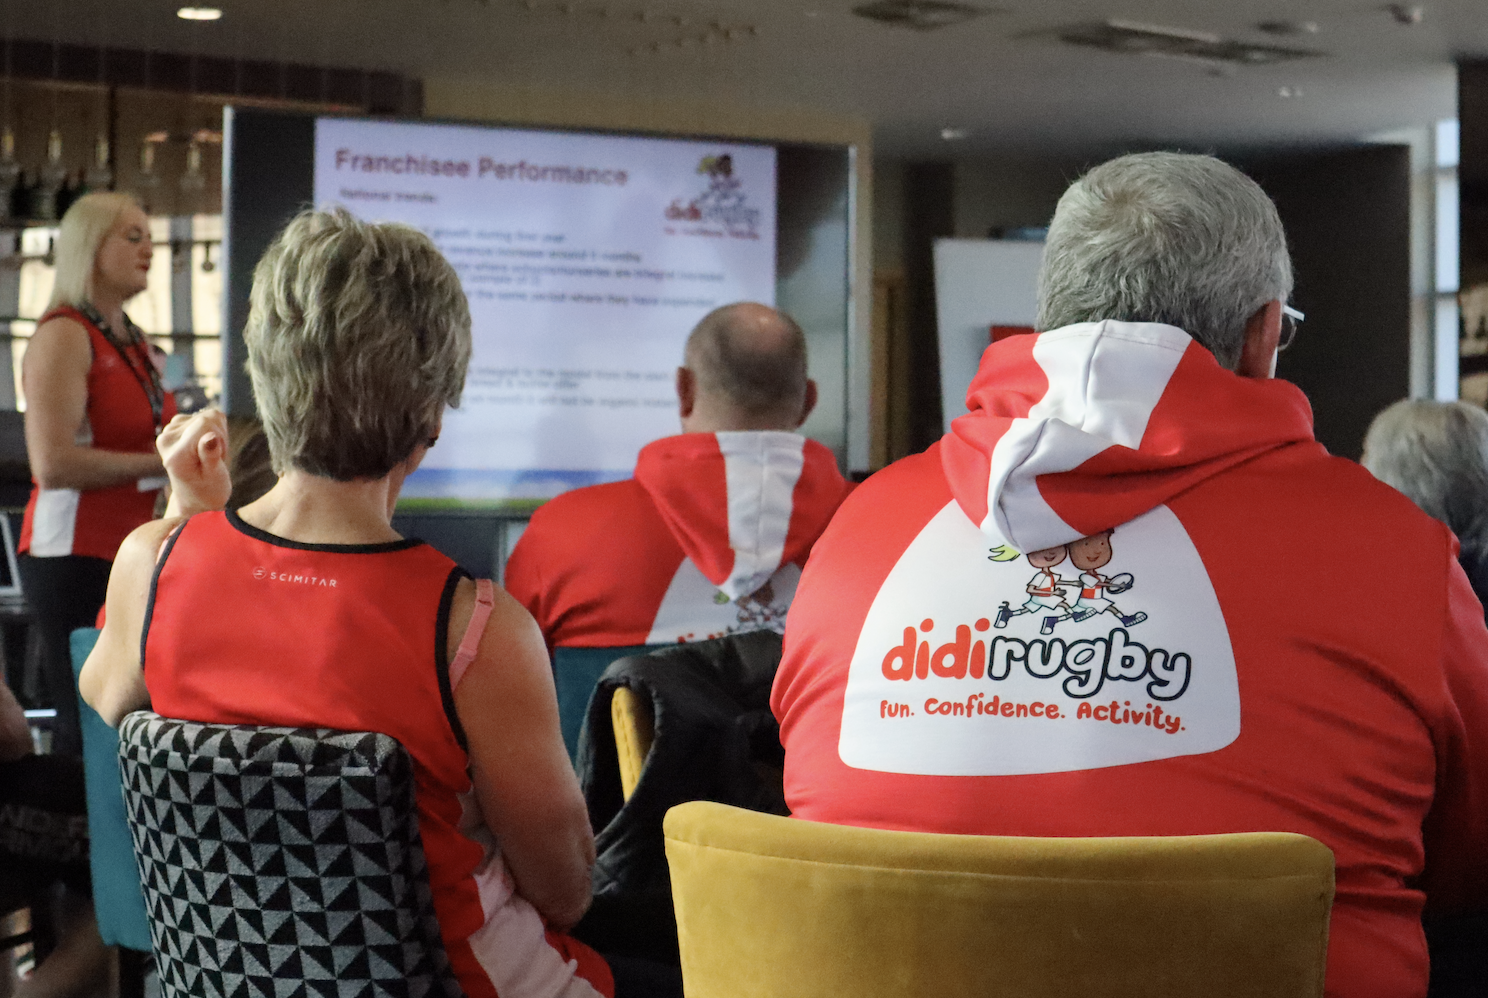 didi rugby CEO Vicky Macqueen presents to franchise owners at the annual didi rugby conference in March 2022